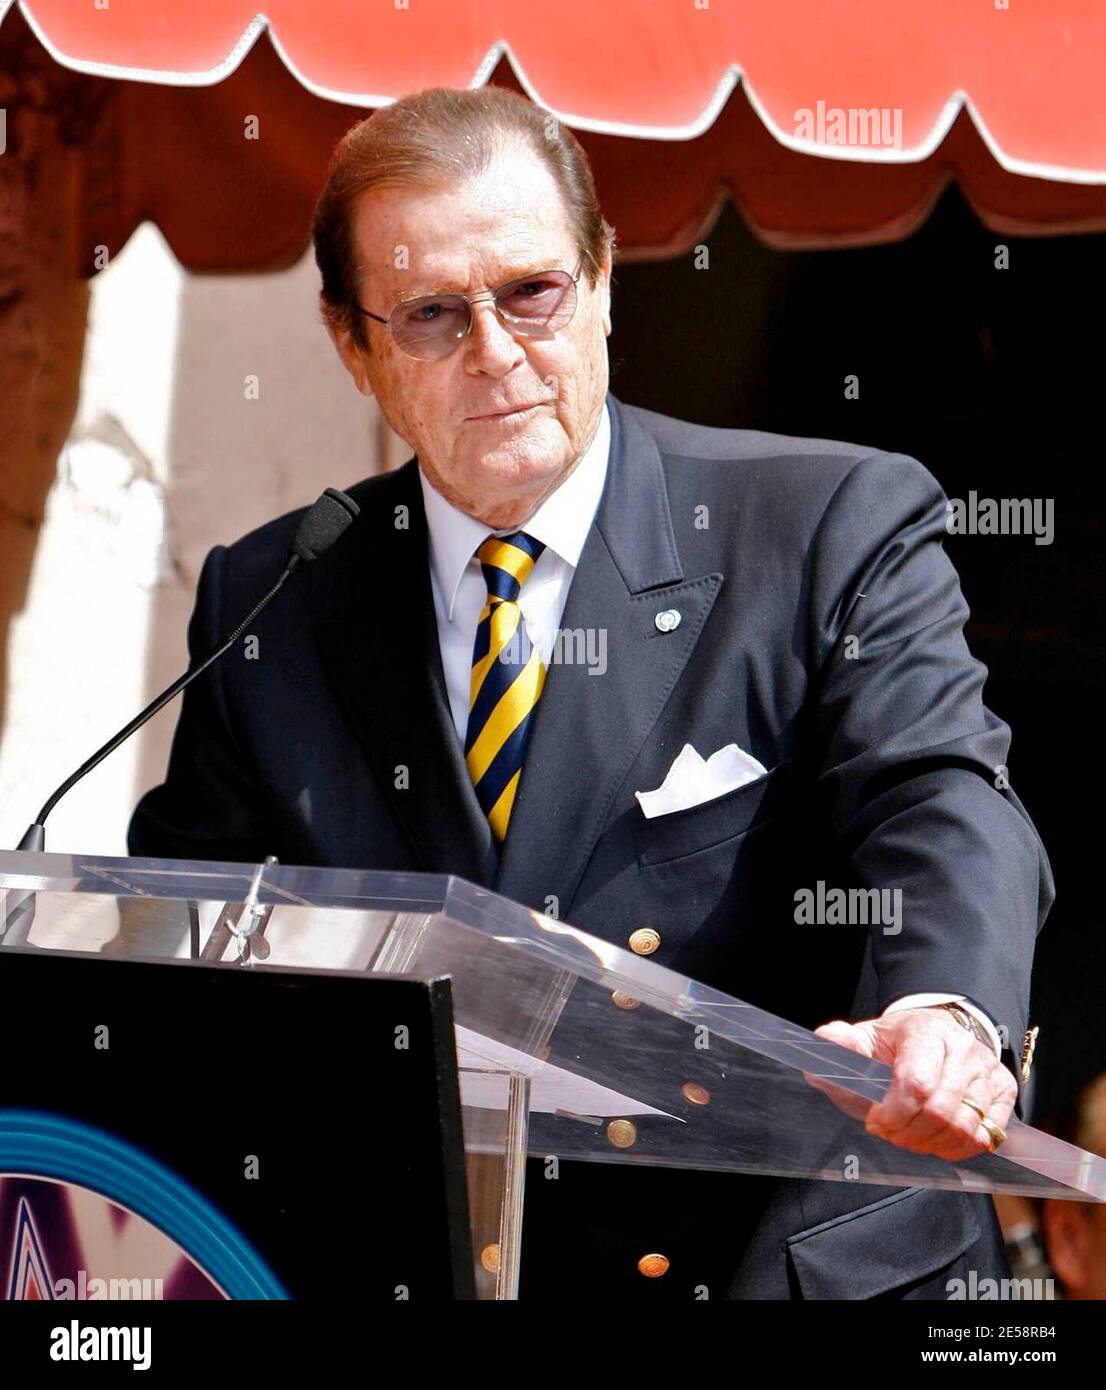 Roger Moore receives a star on the Hollywood Walk of Fame. Stephanie Powers and James Bond co-stars Richard Kiel ('Jaws') and David Hedison ('Felix Leiter') attended the ceremony. Los Angeles, Calif. 10/11/07.   [[laj]] Stock Photo